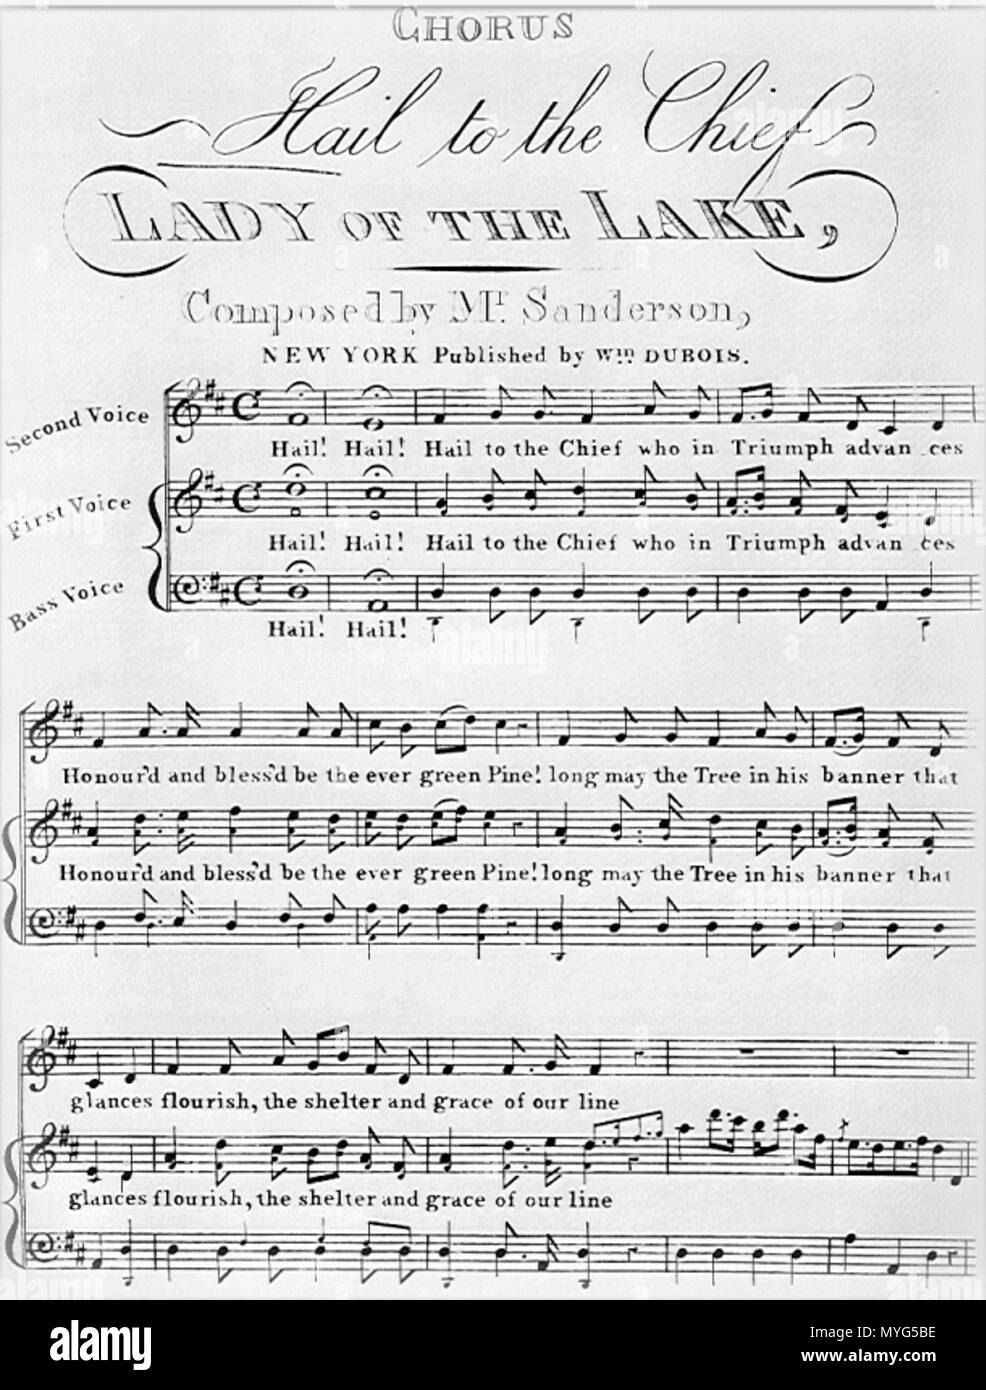 . The author is a Mr Sanderson. This is a picture of the chorus of Hail to the Chief sheet music. The website where I found this image is http://www.jmu.edu/madison/center/main pages/material/audio/music/hail.htm. Uploaded to Wikipedia 2006-07-24. This file is lacking author information. 228 Hail to the Chief Chorus Sheet Music Stock Photo